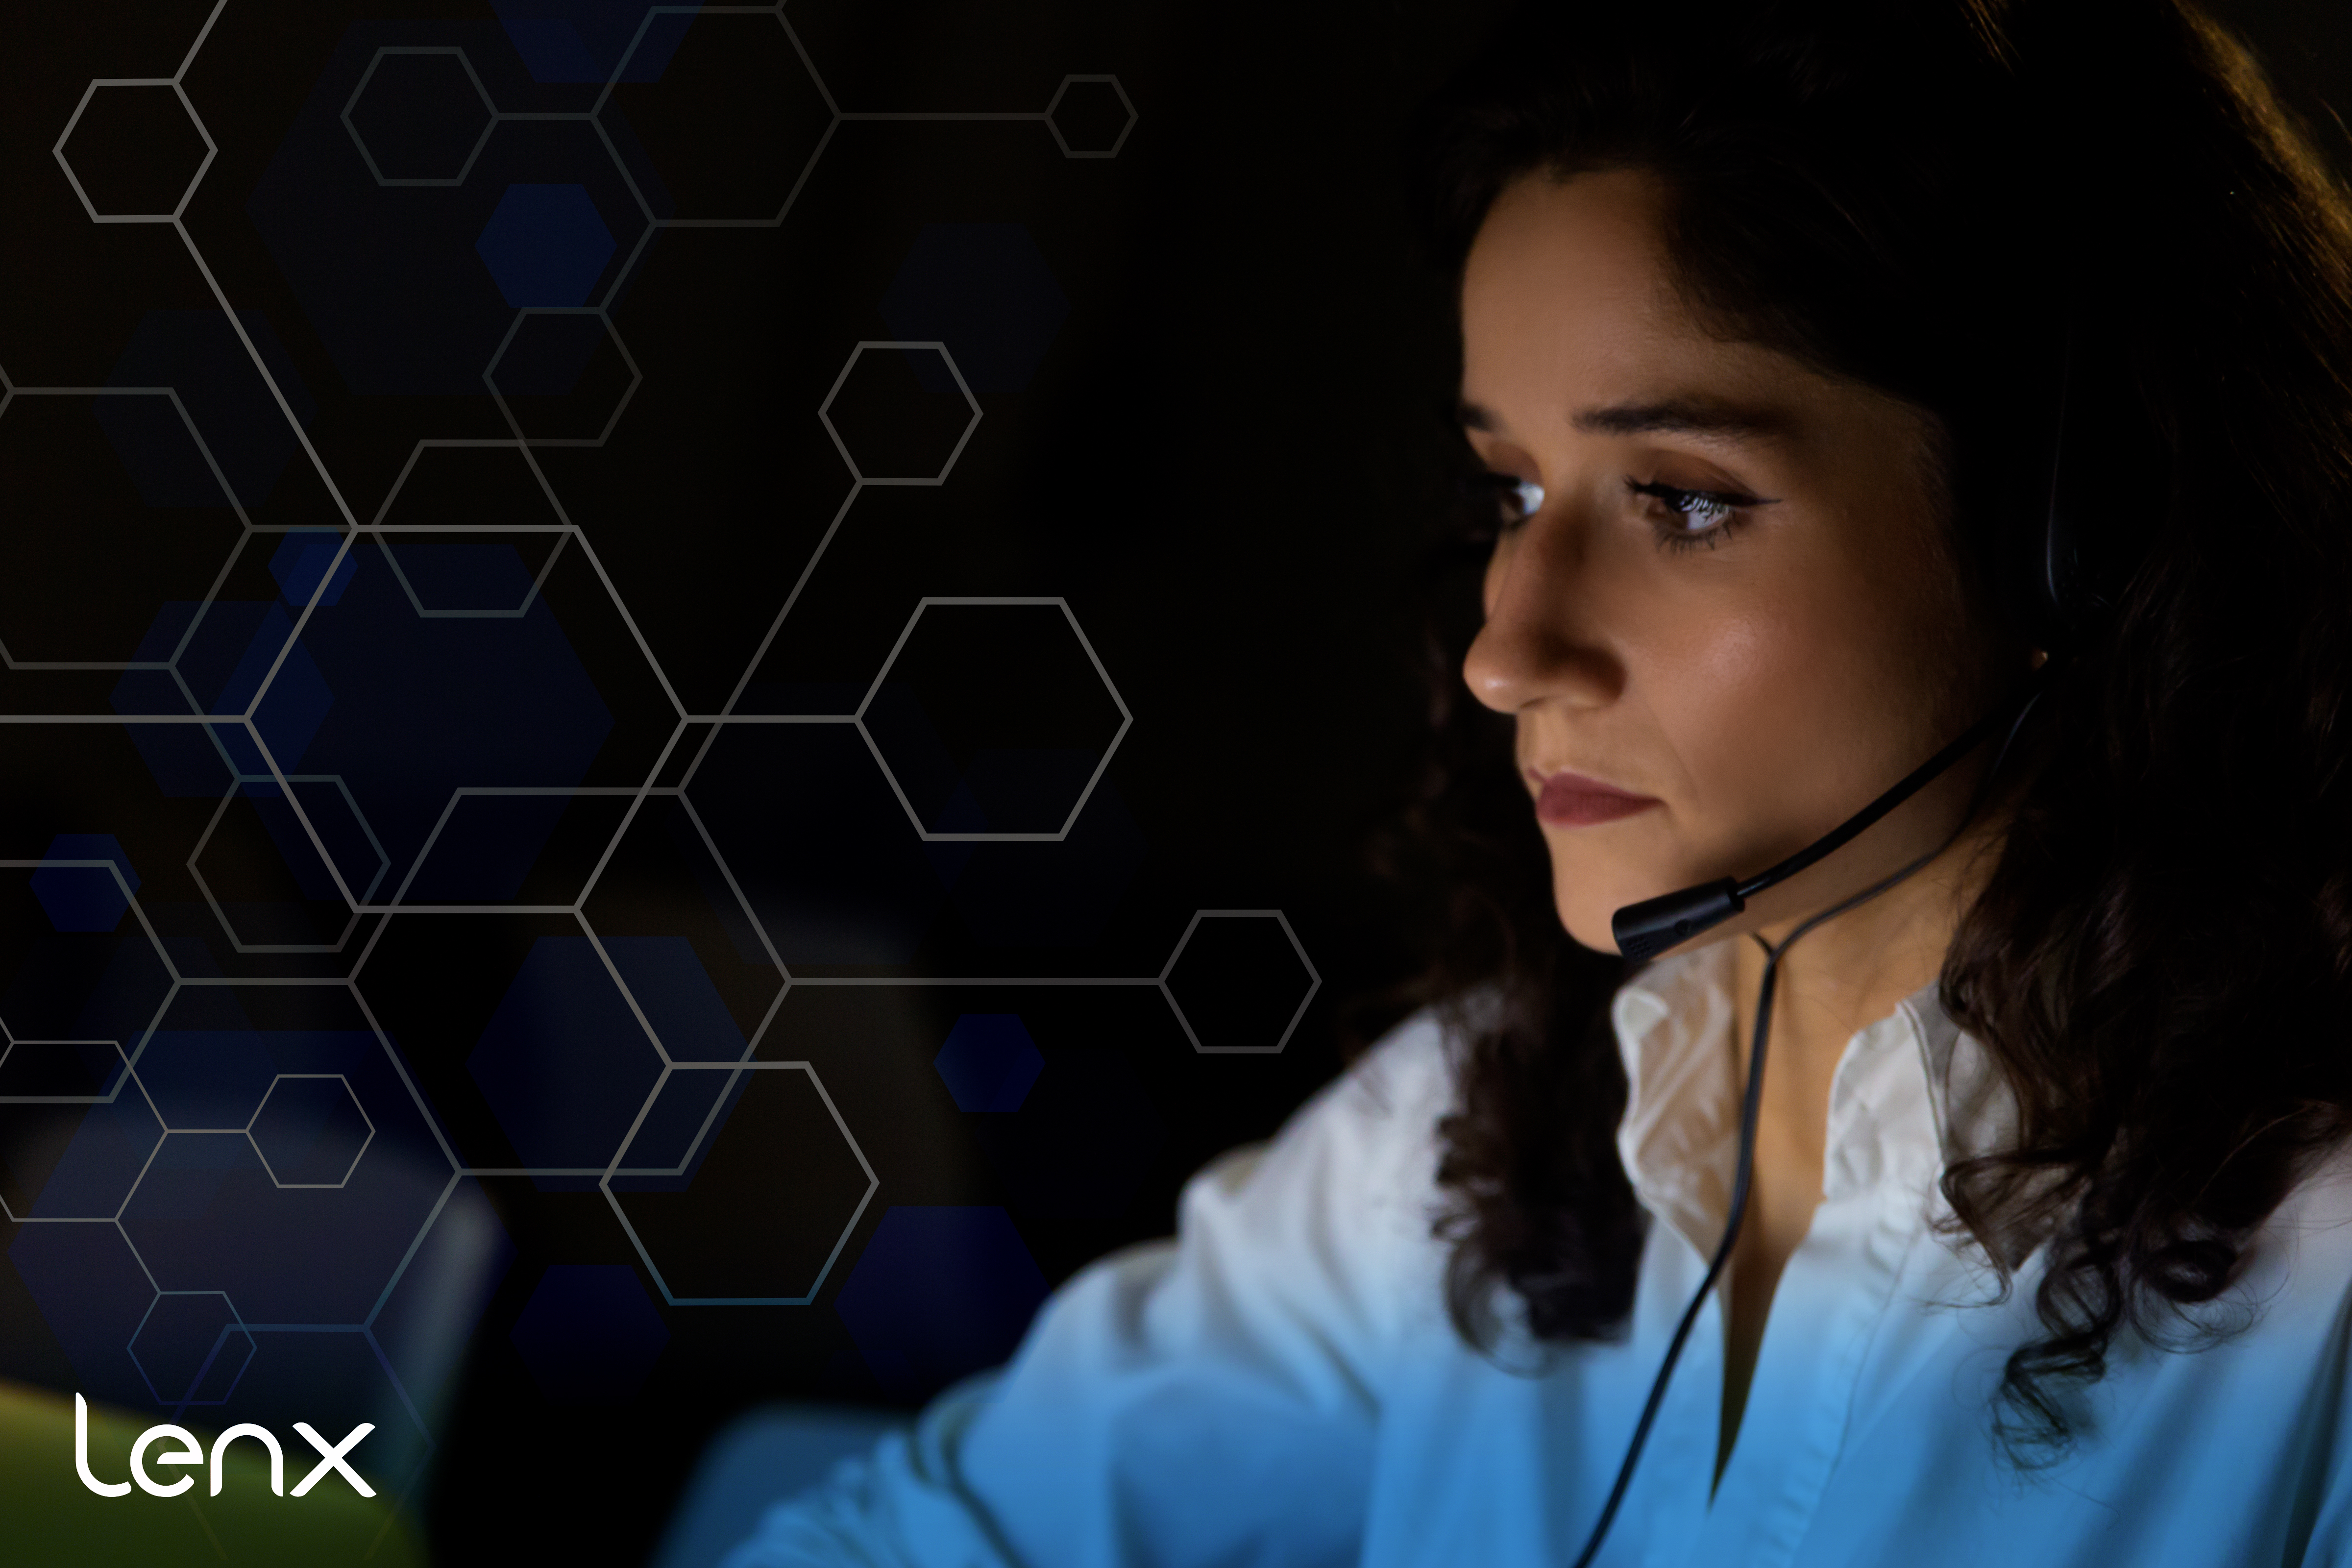 Training Dispatchers To Work With AI Security And Active Shooter Detection Systems